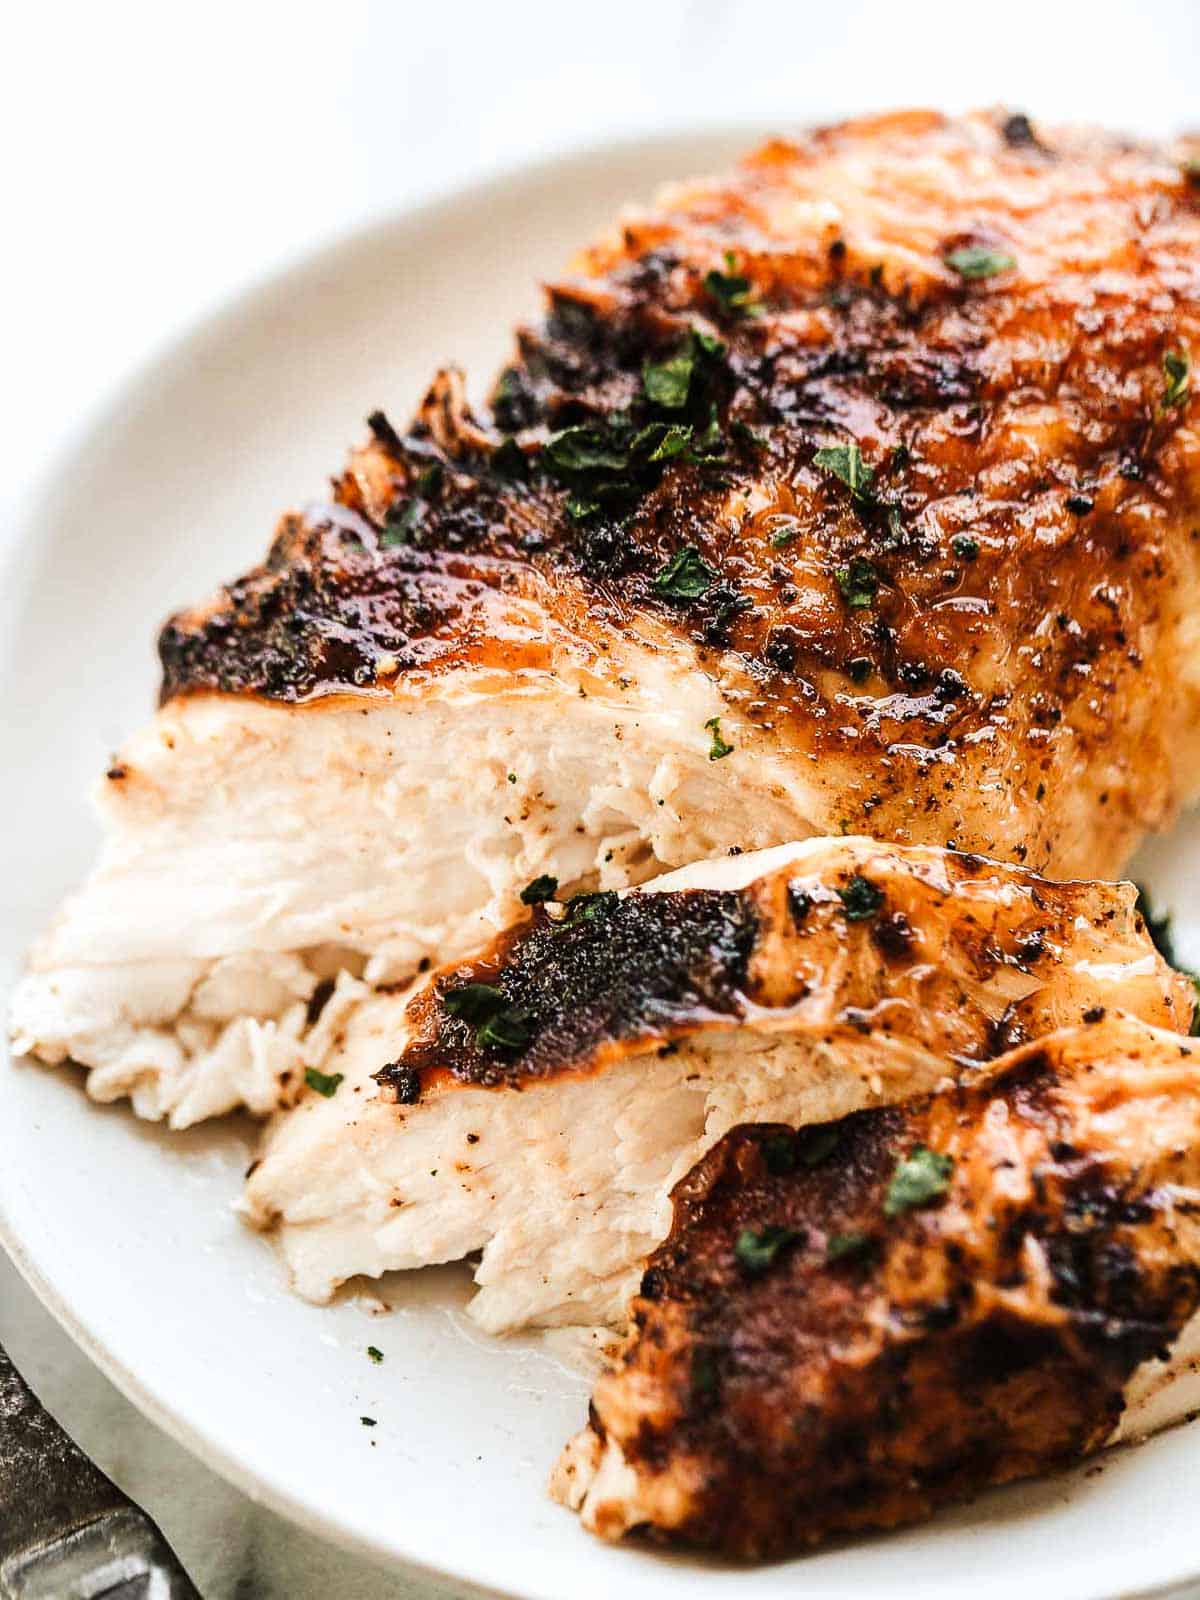 A slice of juicy chicken breast on a plate.